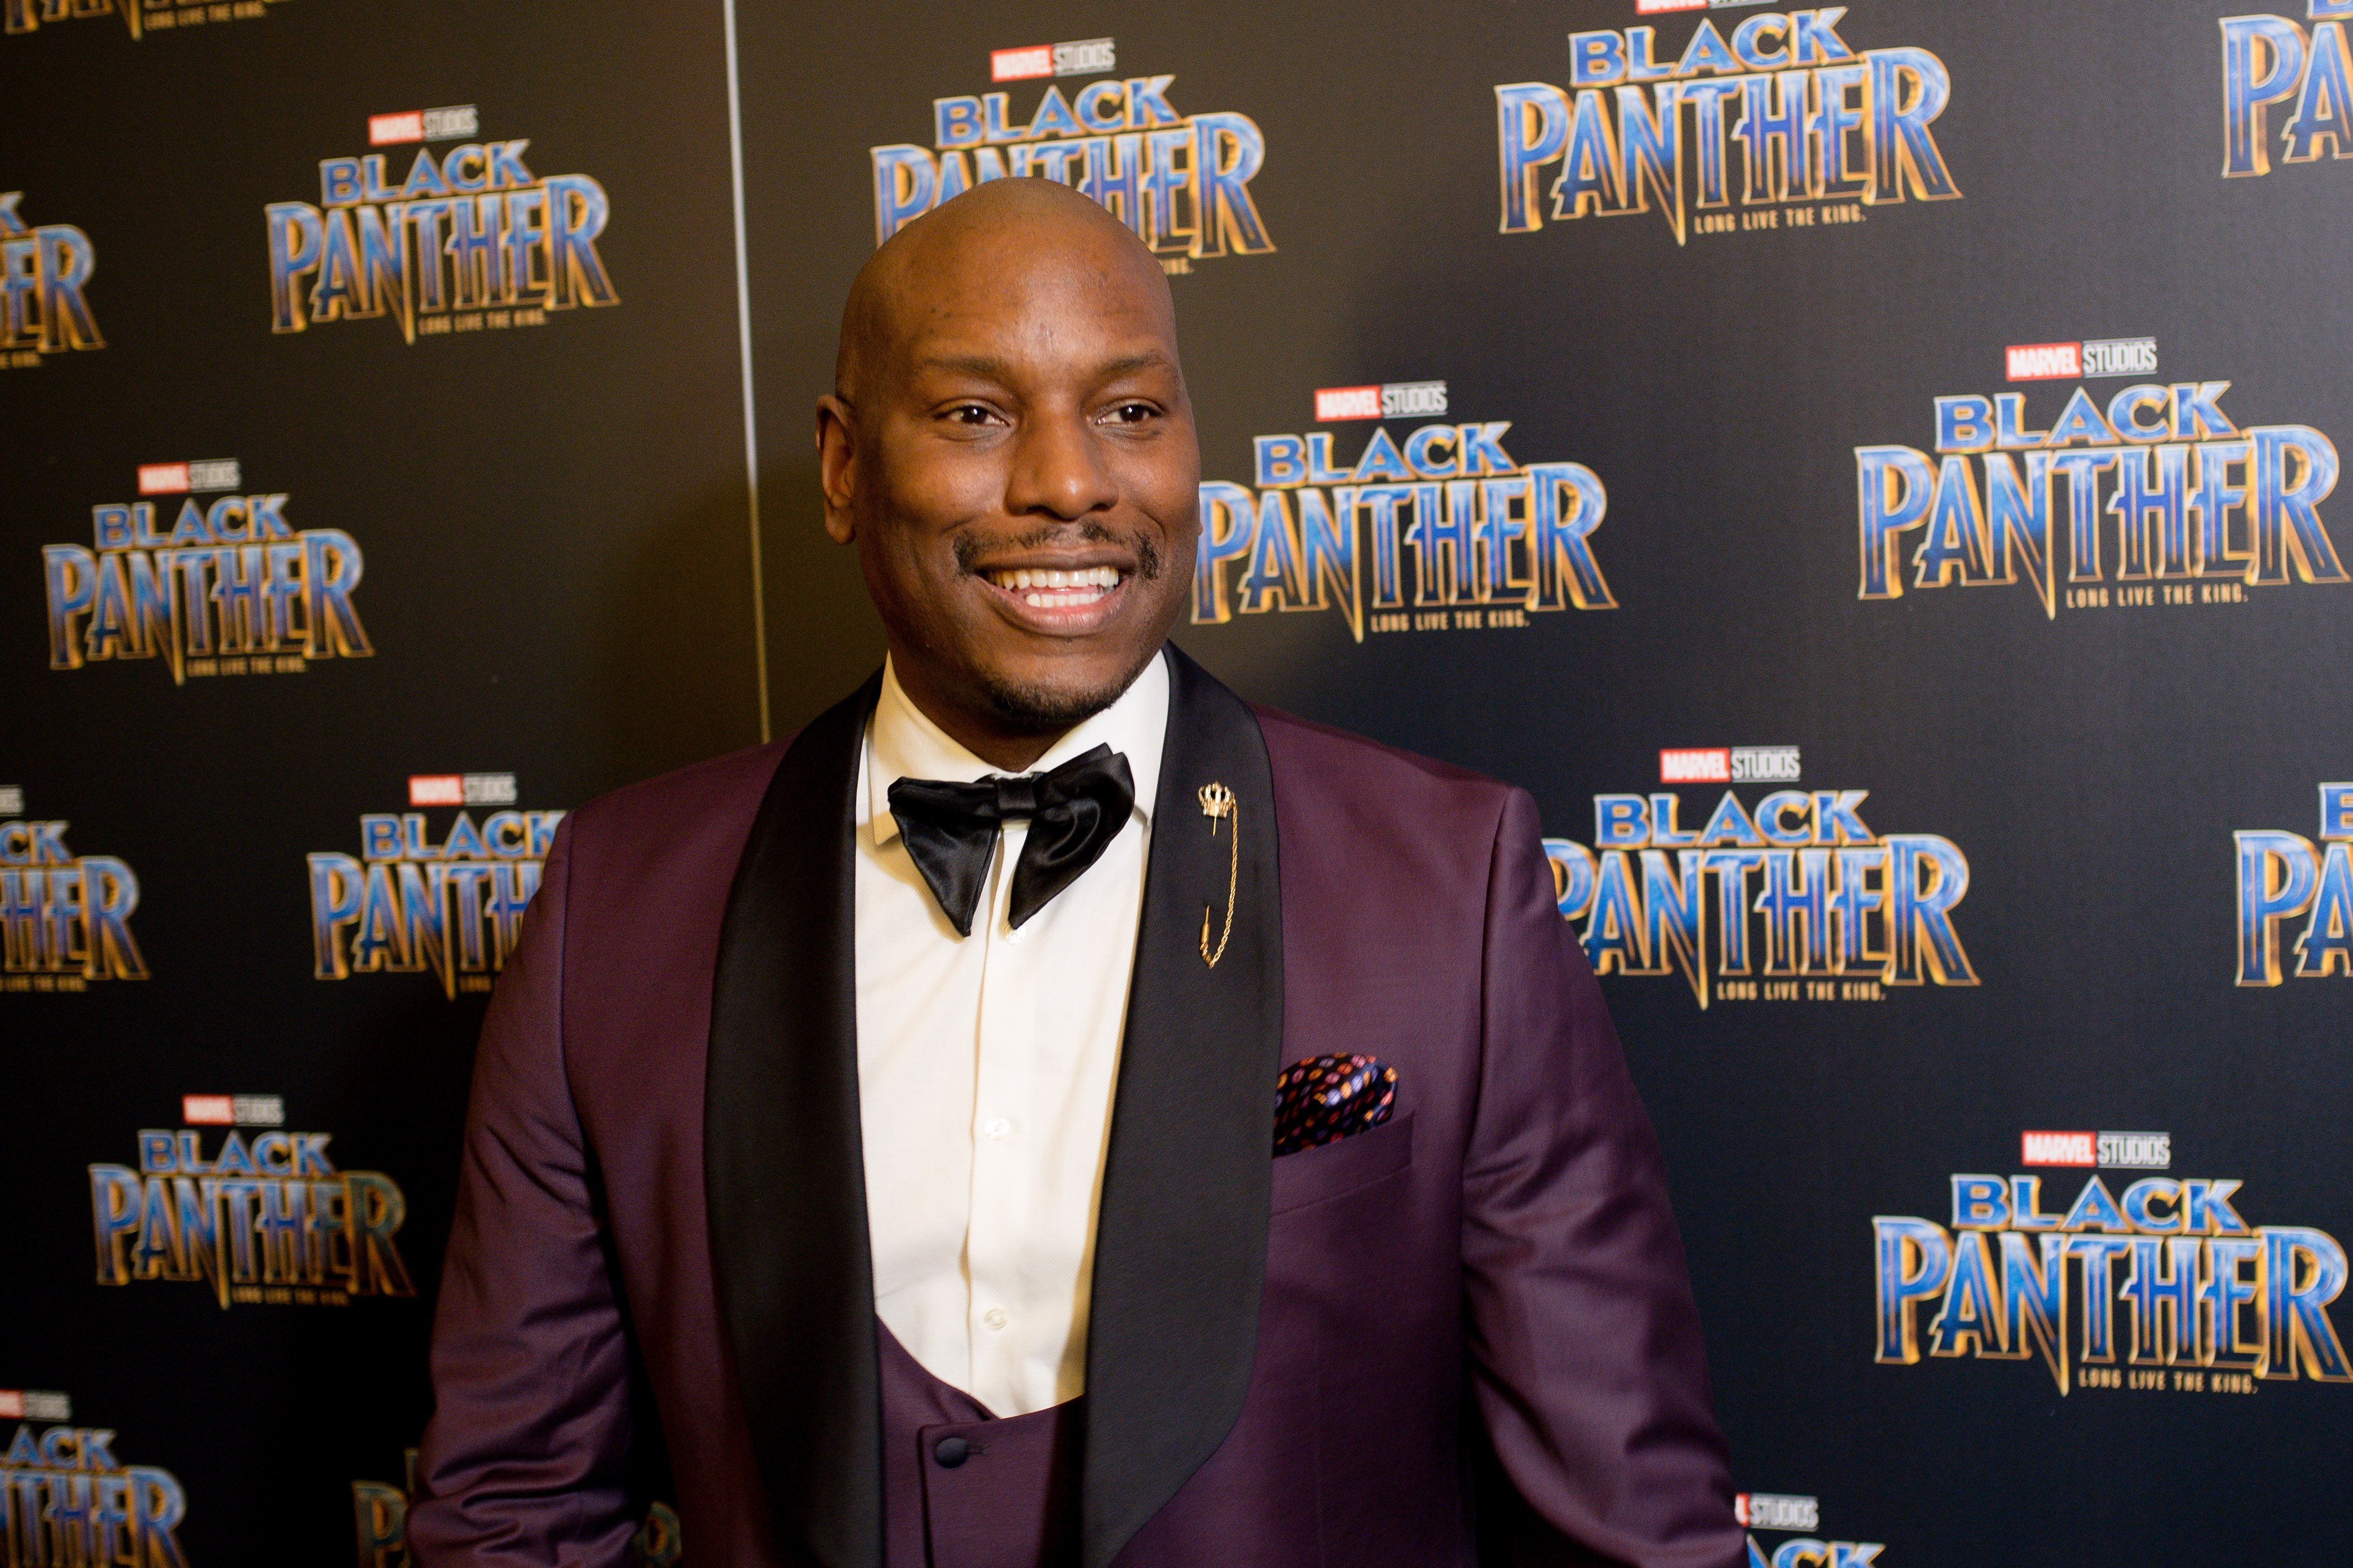 Tyrese Gibson attends the Marvel Studios "Black Panther" Atlanta movie screening at The Fox Theatre on February 7, 2018 | Photo: GettyImages